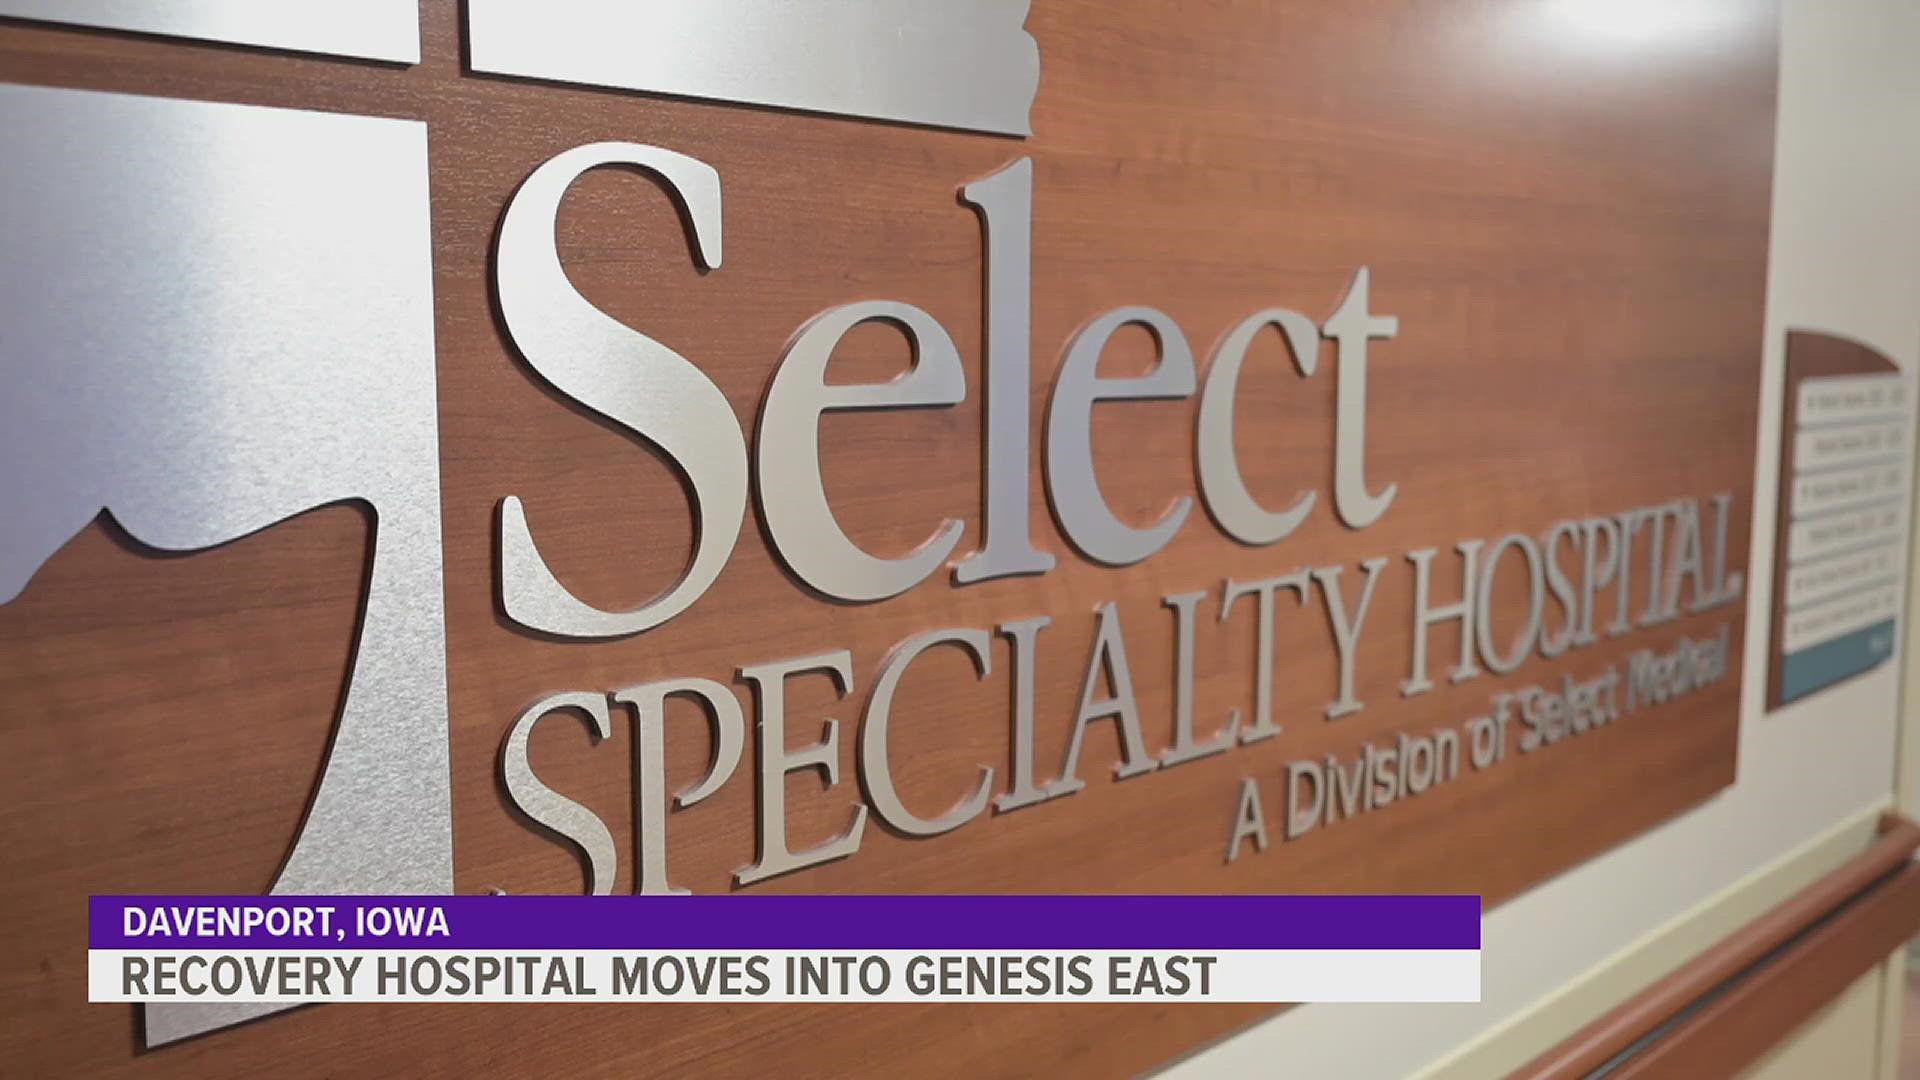 A 35-bed "critical illness recovery hospital" is moving into the floor of the Davenport hospital, serving those who need long-term or specialized care.